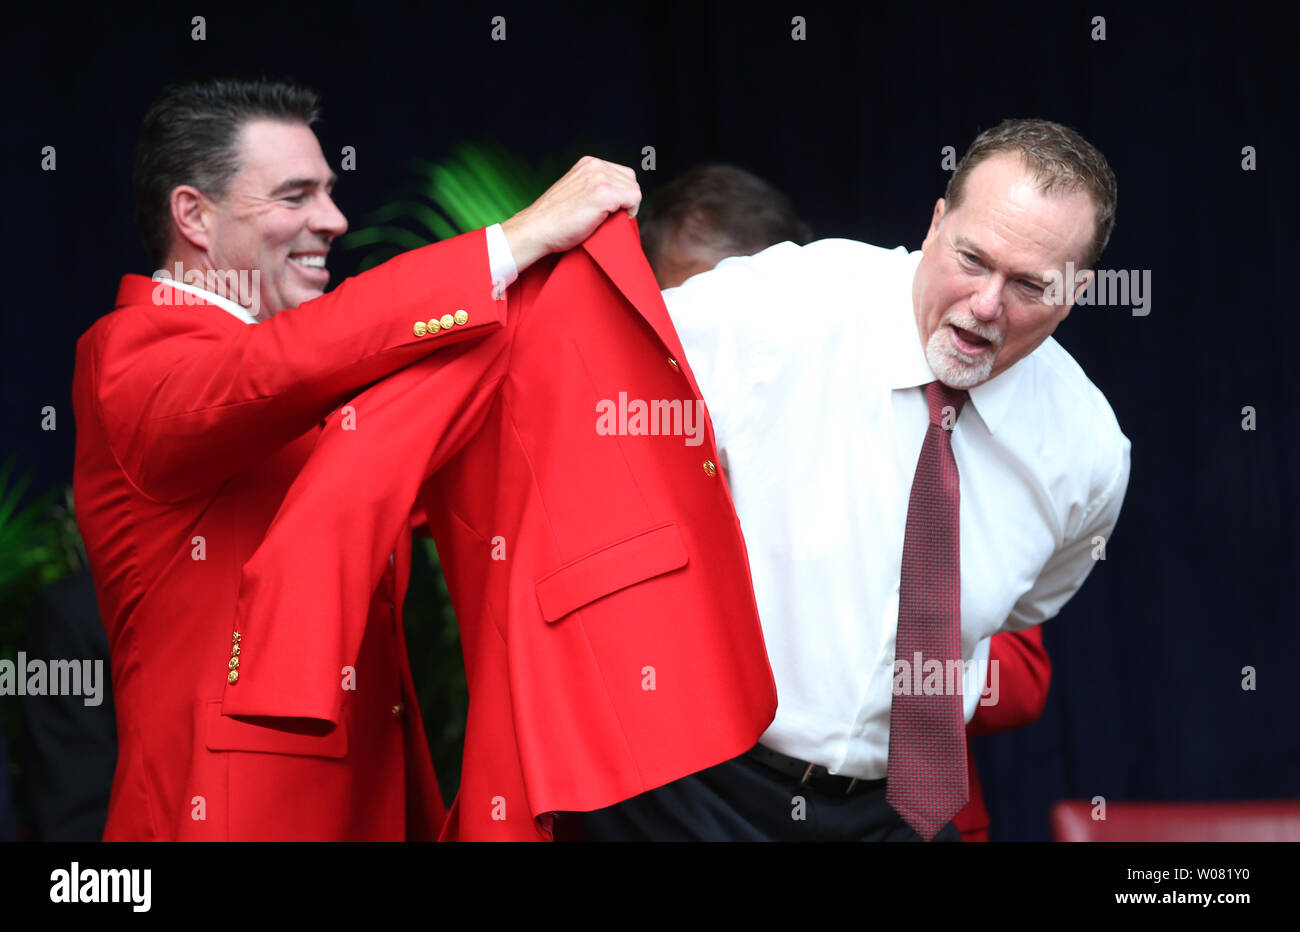 Newly inducted St. Louis Cardinals Hall of Fame member Mark McGwire tries on his new red jacket with the help of former teammate Jim Edmonds during the St. Louis Cardinals Hall of Fame Induction ceremonies in St. Louis on August 26, 2017. McGwire played 4 1/2 years with the Cardinals breaking Roger Maris' home run record, hitting 70 home runs in 1998 and is now the bench coach for the San Diego Padres.       Photo by Bill Greenblatt/UPI Stock Photo